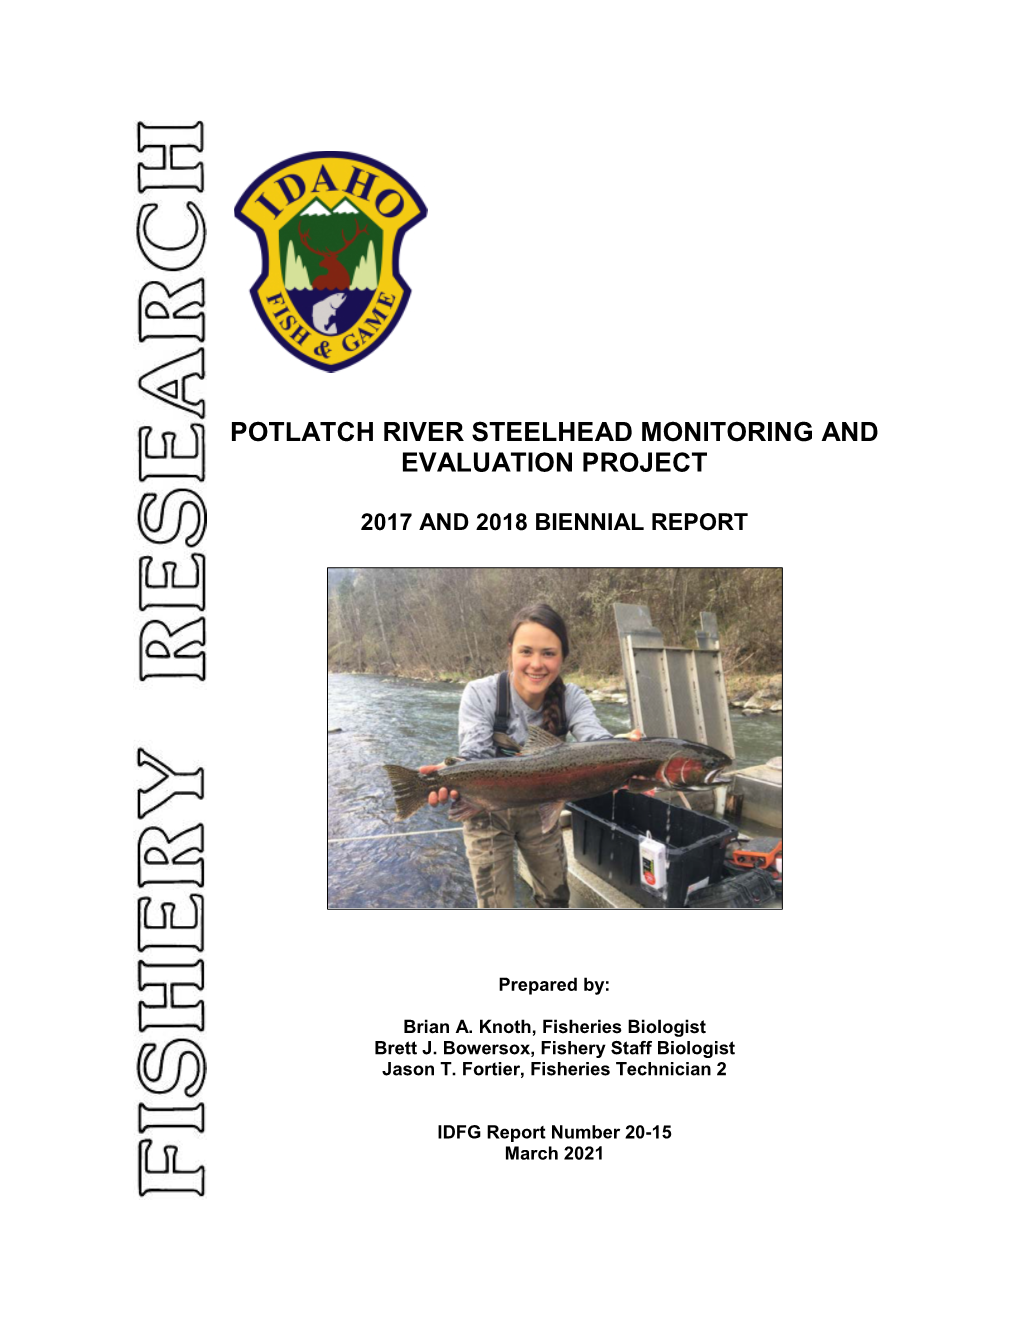 Potlatch River Steelhead Monitoring and Evaluation Project